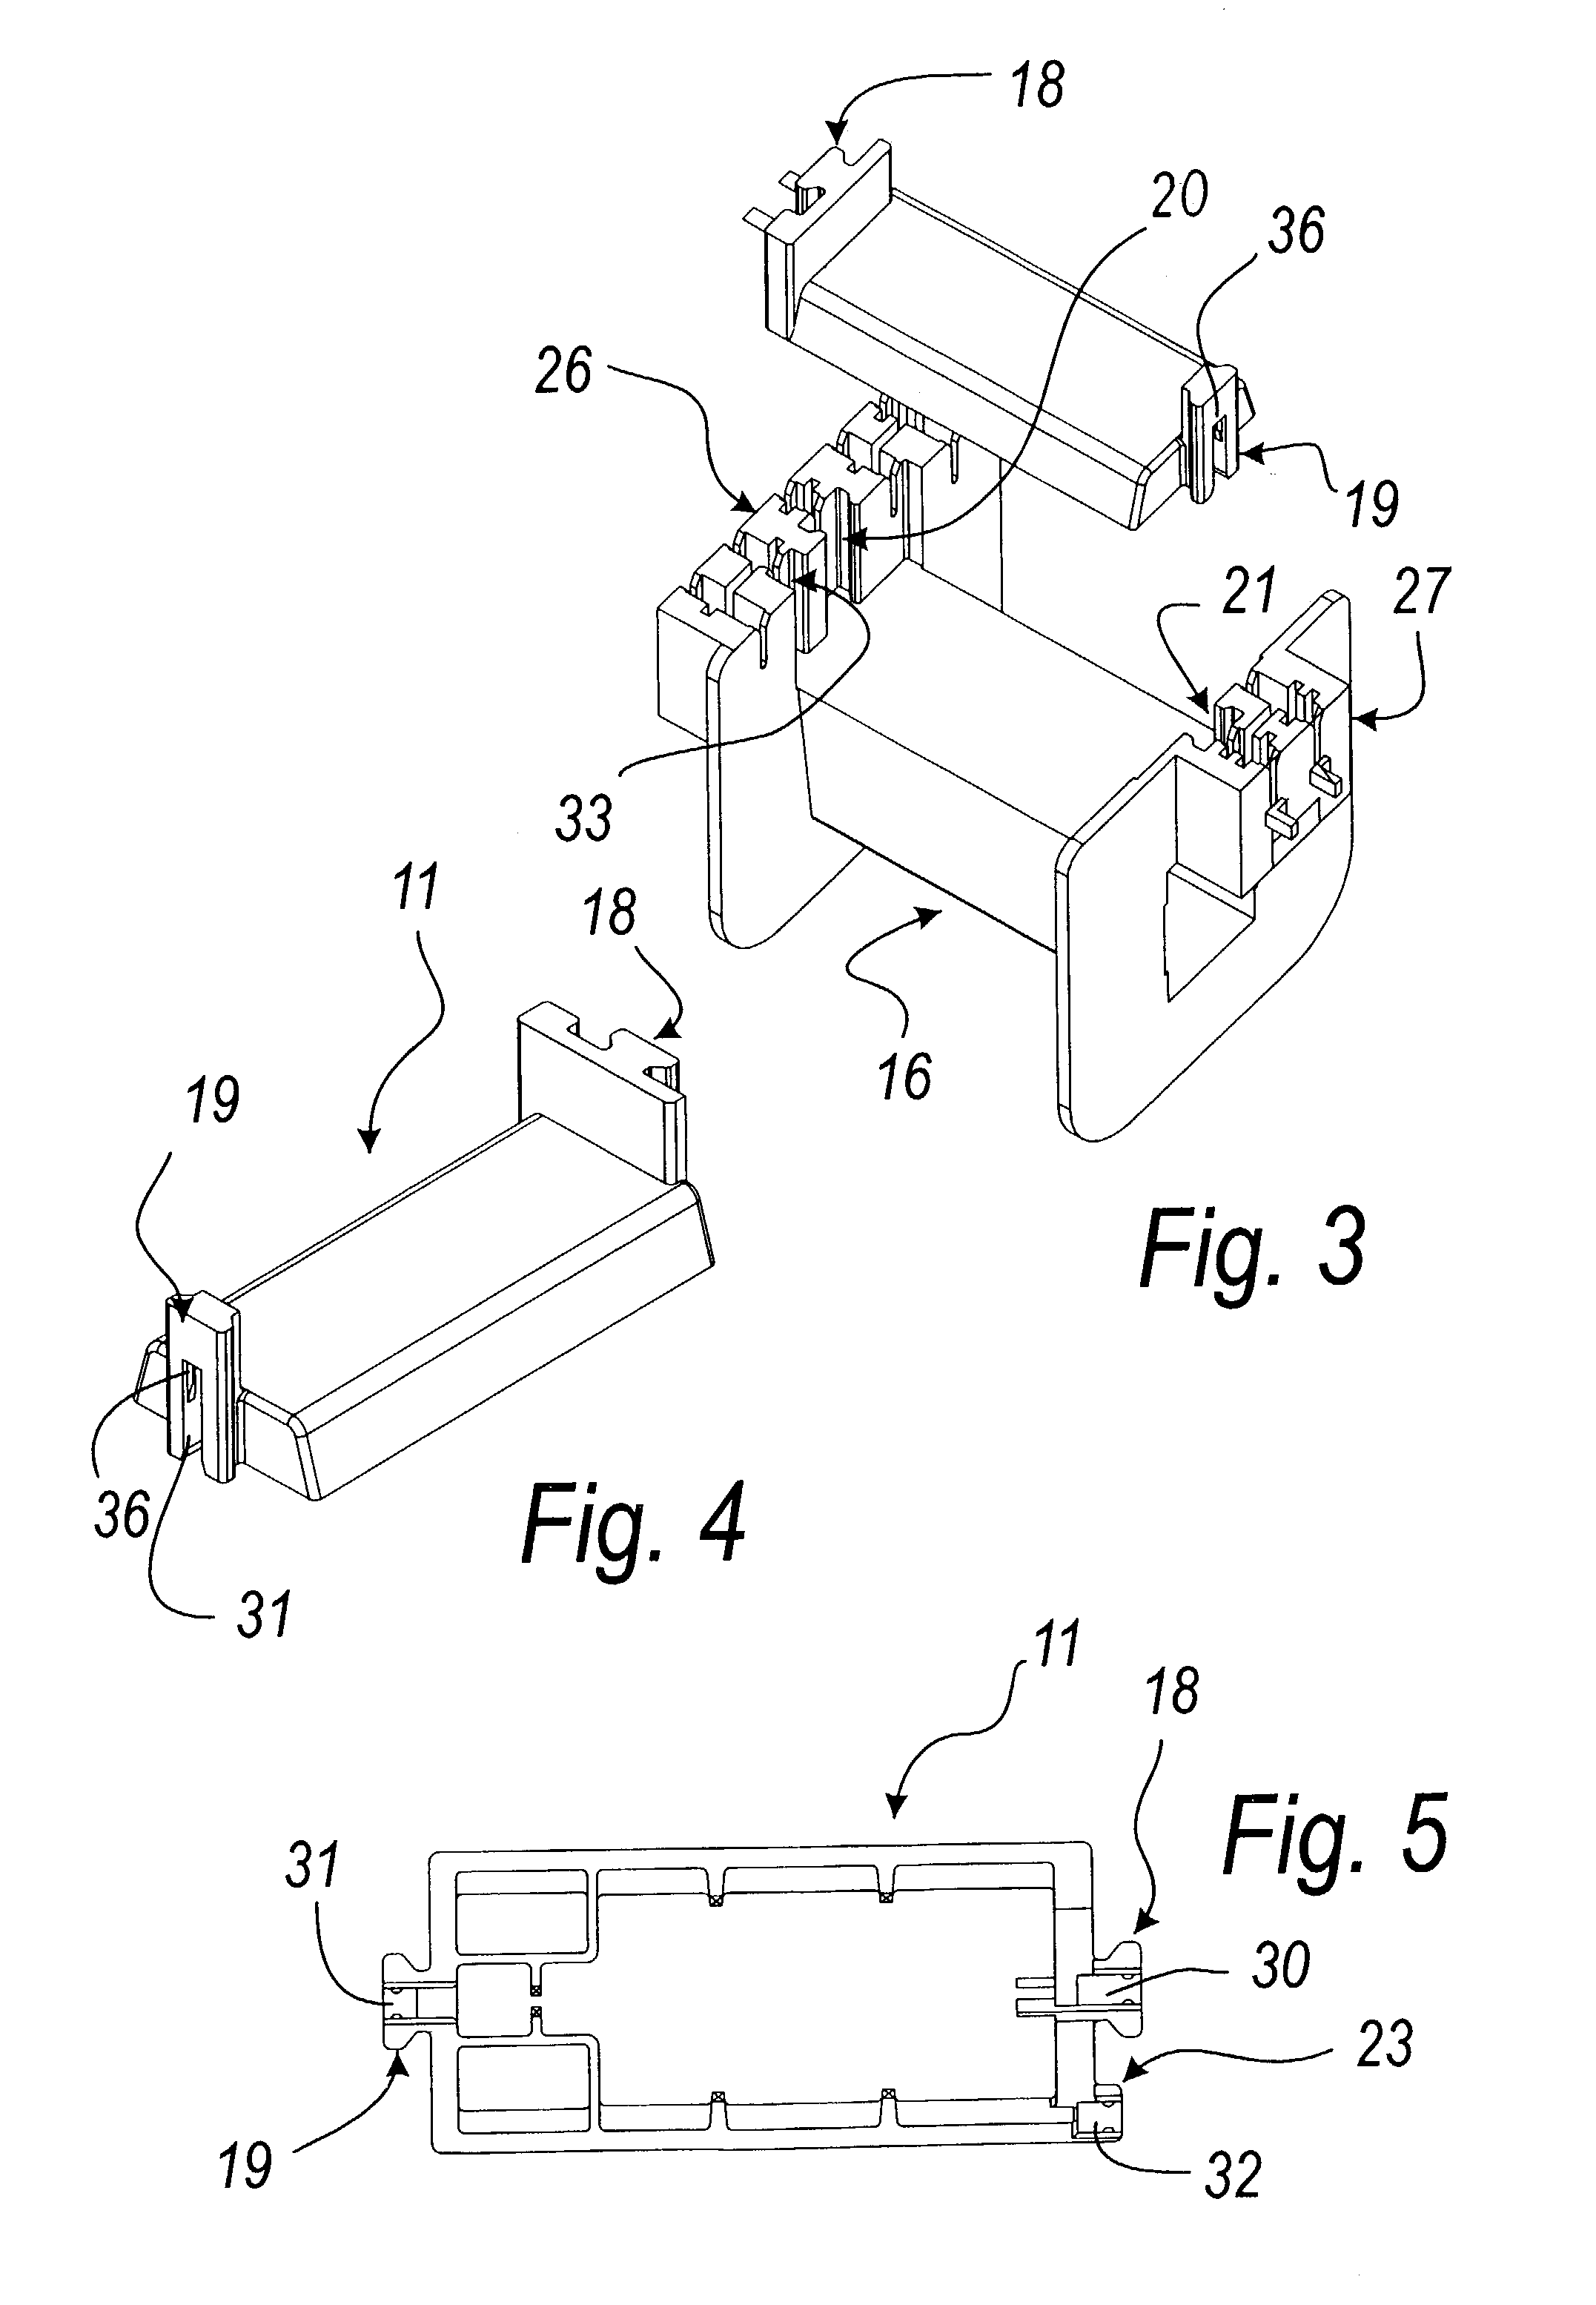 Device for connecting and insulating a thermal protector and/or a fuse for electrical windings of motors